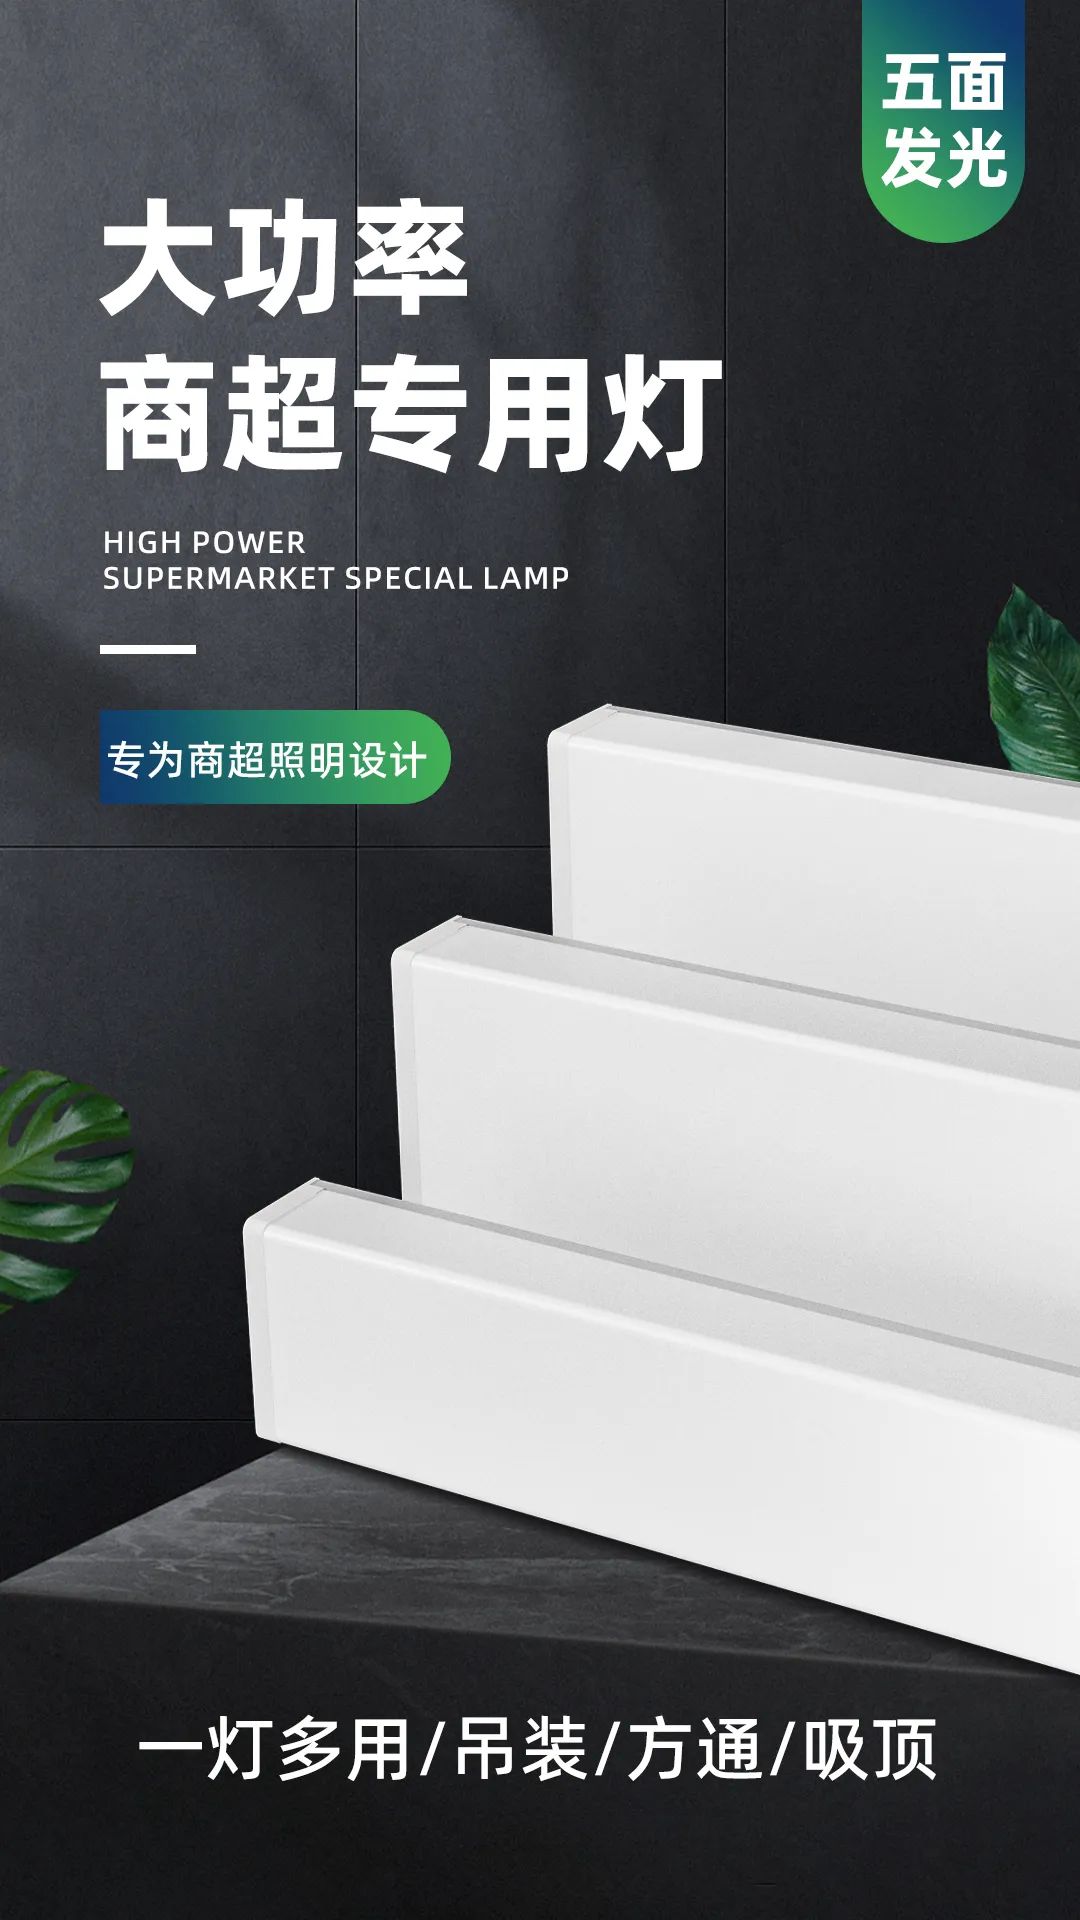 【 Product Recommendation 】 High Power Commercial Super Special Lamp